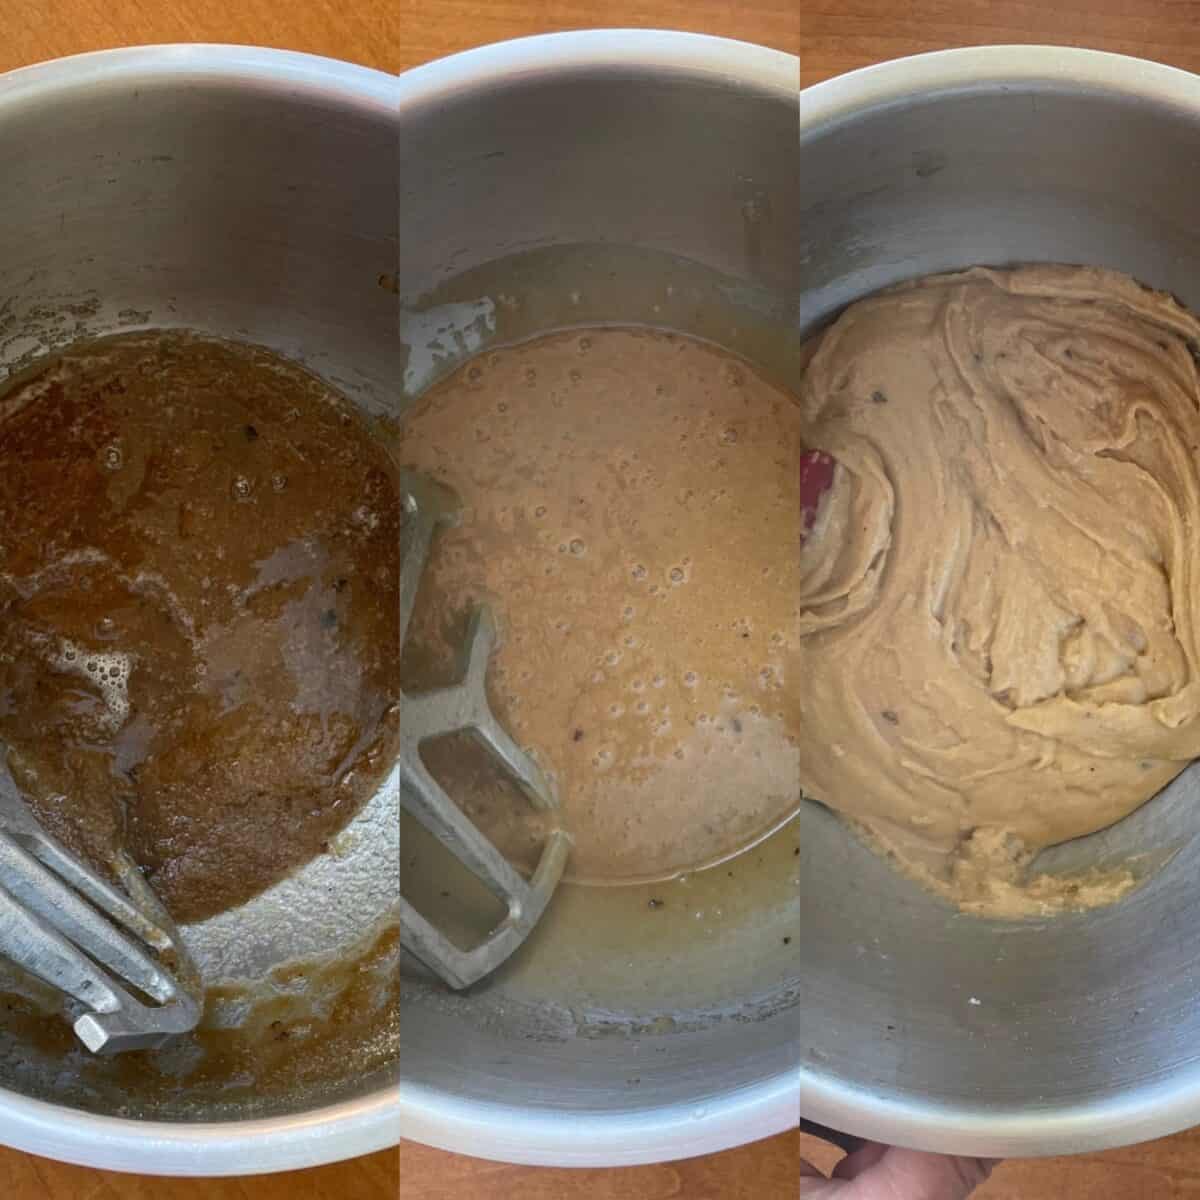 three panels showing recipe steps from combining brown butter and sugar, adding eggs, and then the final cookie batter.